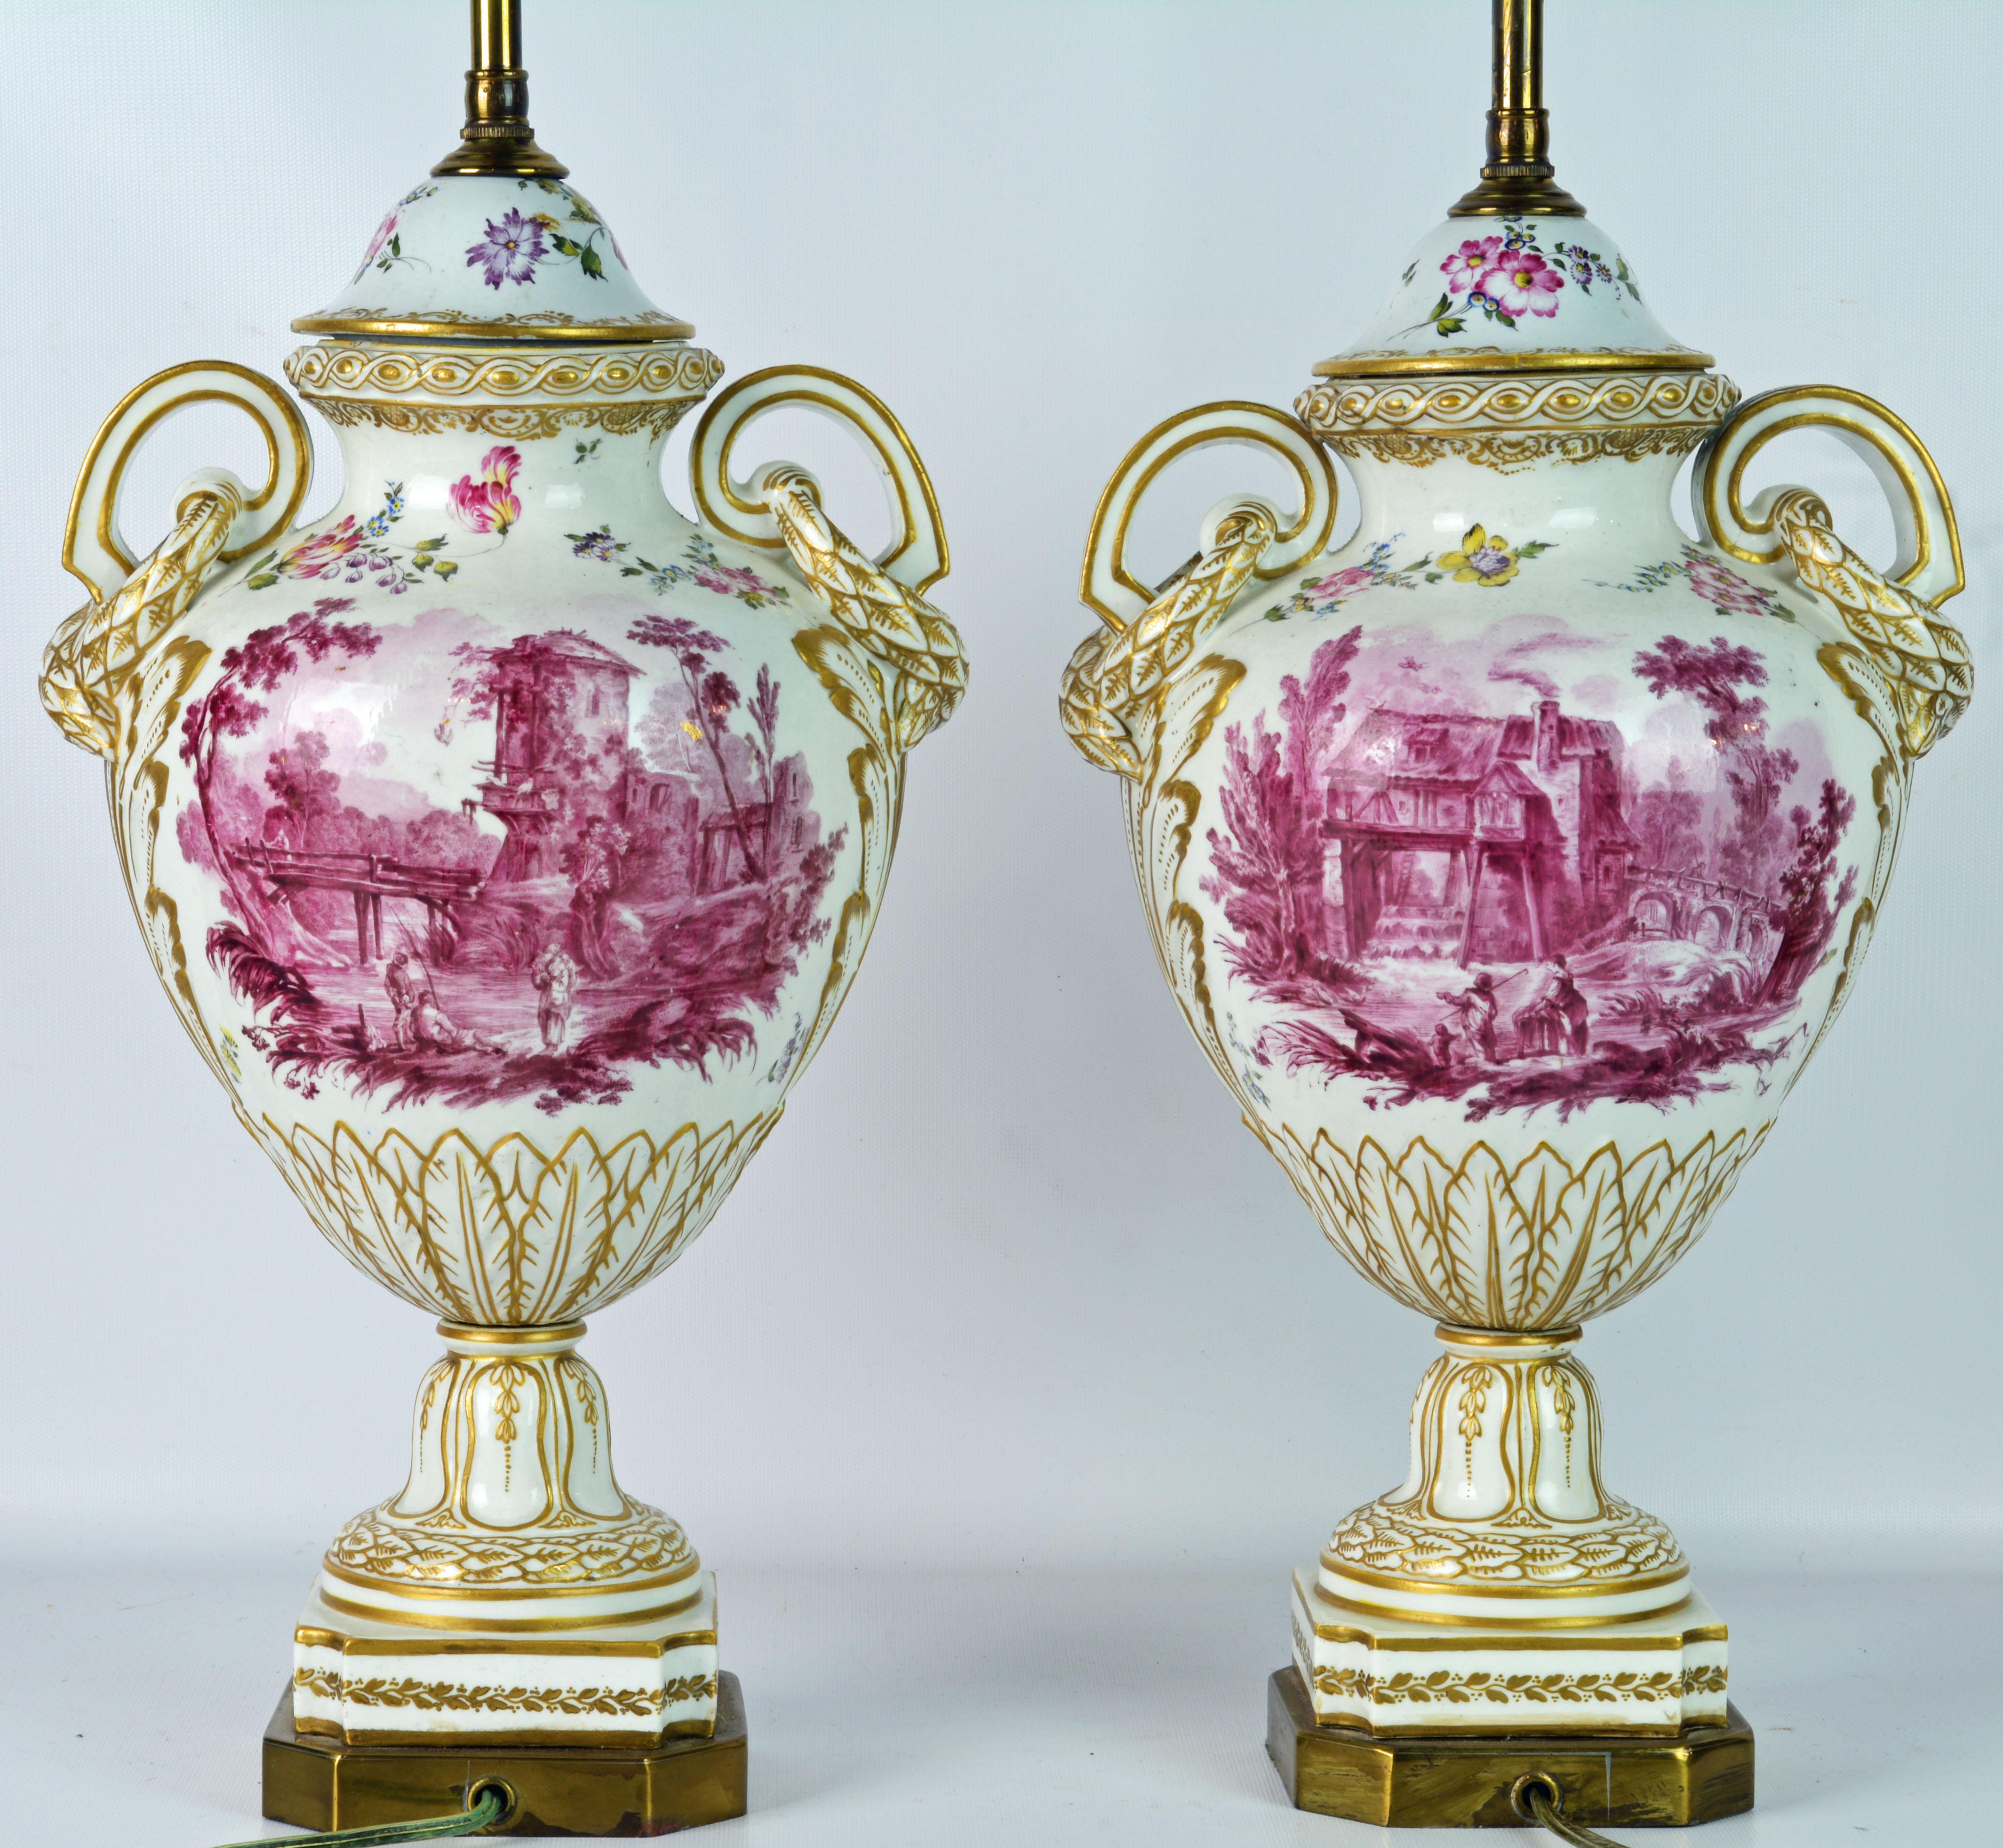 Louis XVI Pair of 19th Century French Old Paris Puce Camaieu Decorated Urns & Table Lamps